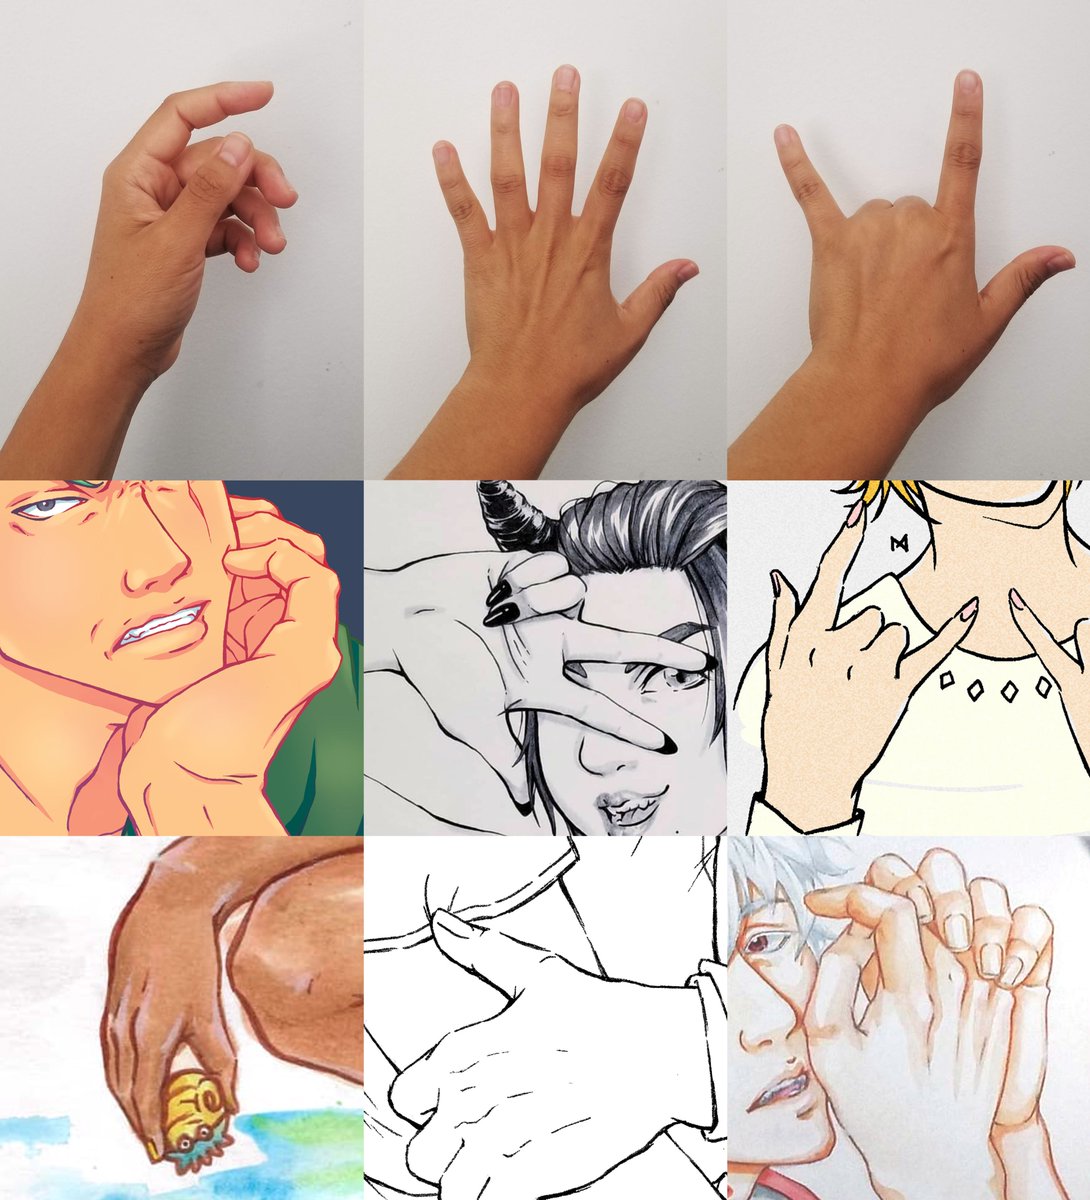 Same here! Specially for tricky poses, I always end up referencing my hands. #handvshand